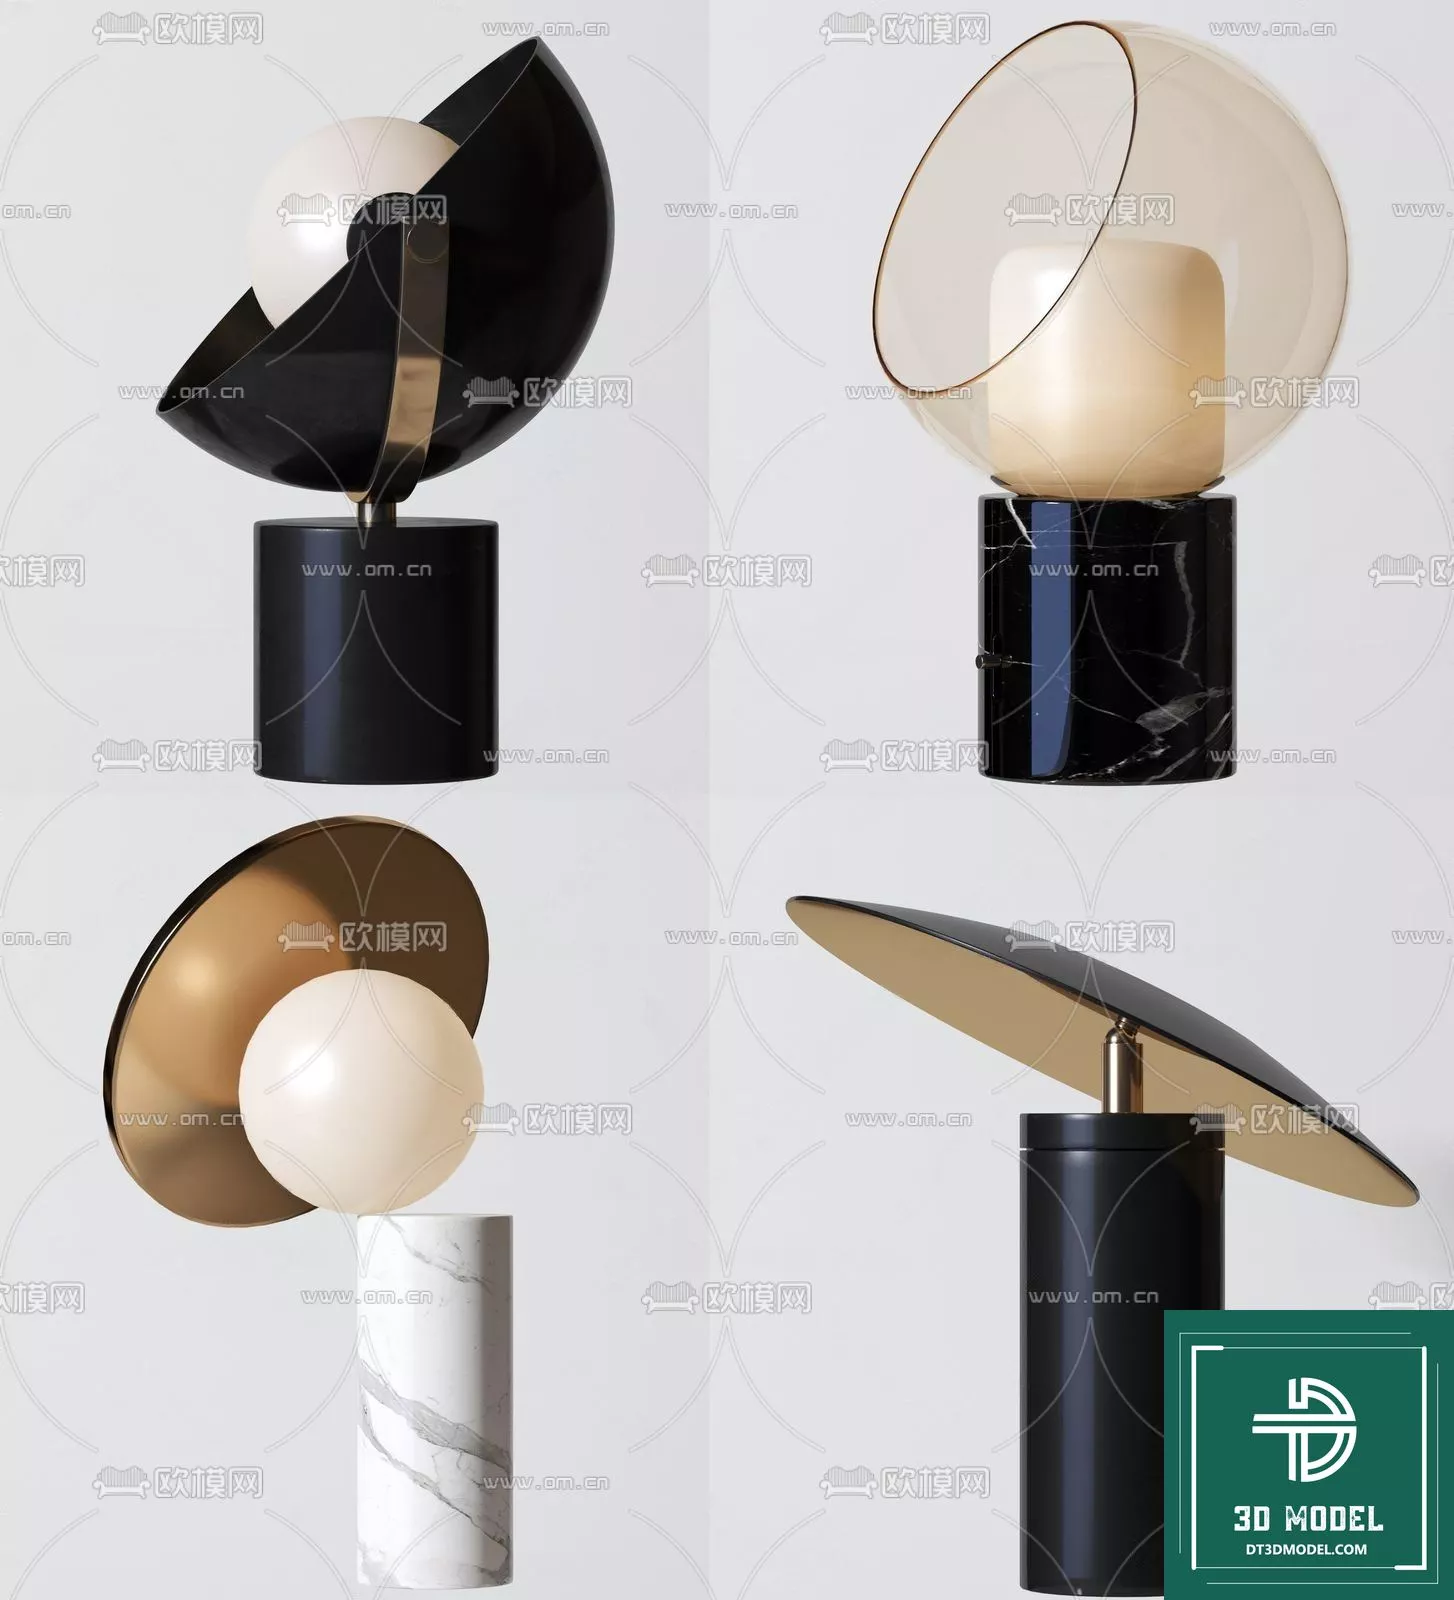 MODERN TABLE LAMP - SKETCHUP 3D MODEL - VRAY OR ENSCAPE - ID14565